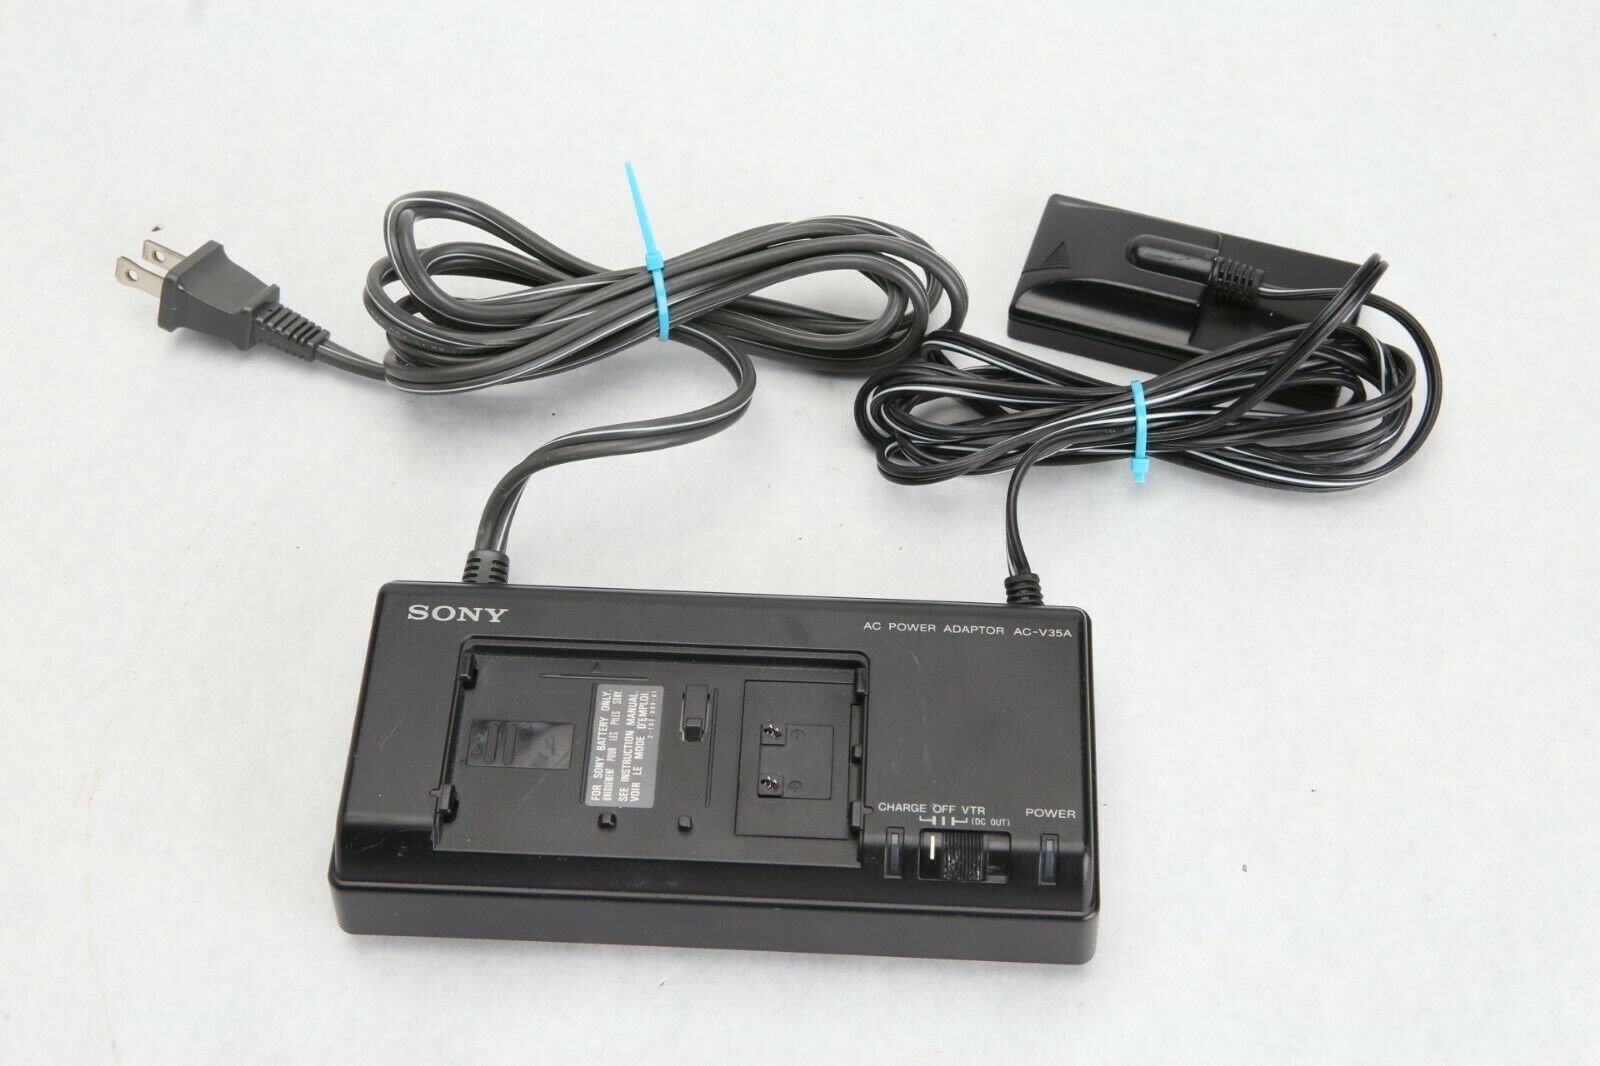 Sony AC-V35A AC Power Adaptor Battery Charger 110-240V 20W 7.5V 1.6A 10V 1.3A Good working condition. Shows signs of ha